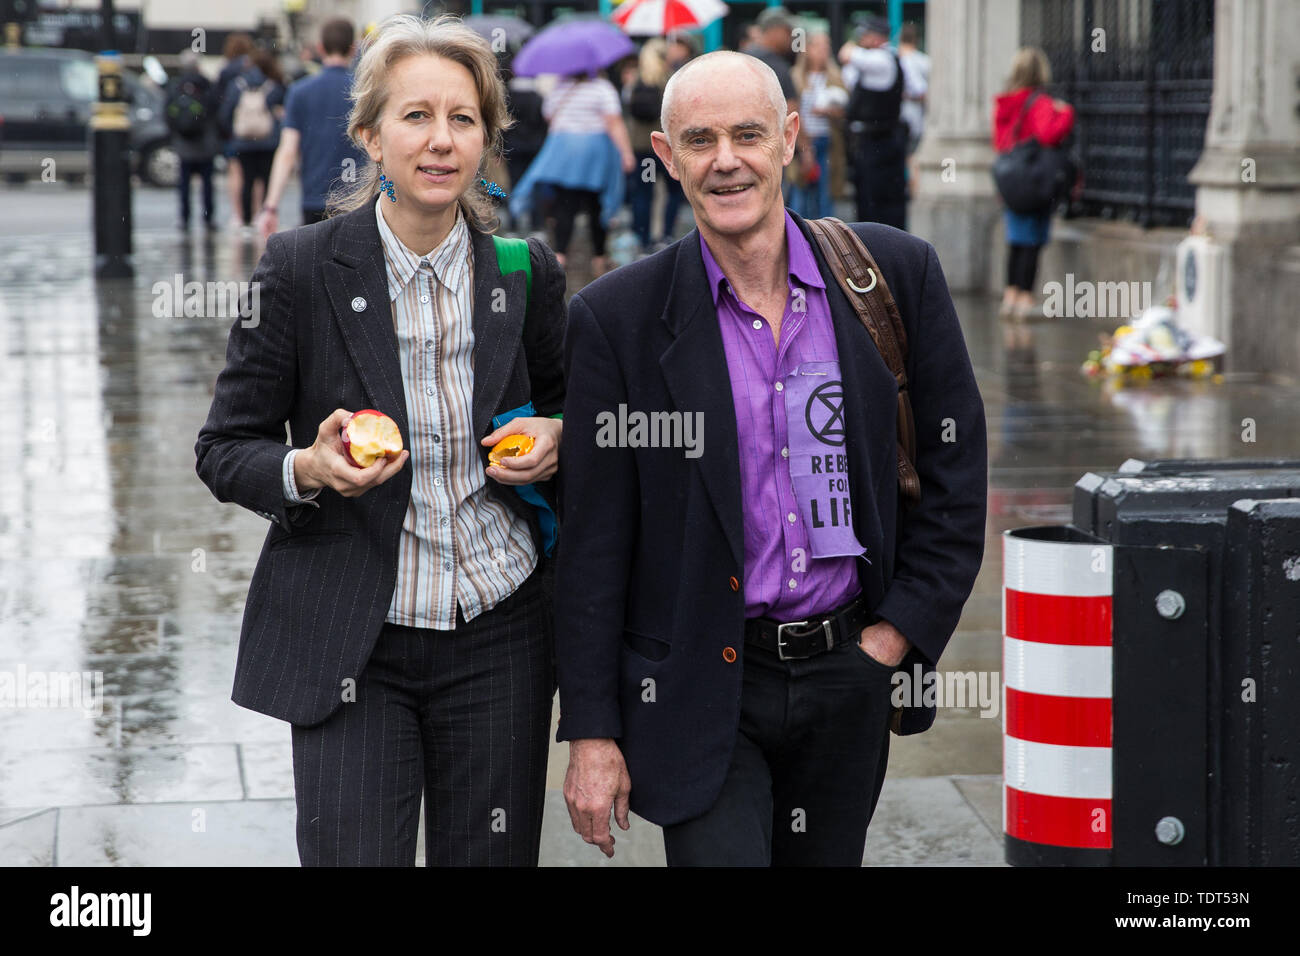 London, UK. 18 June, 2019. Dr Gail Bradbrook and Donnachadh McCarthy of Extinction Rebellion pass Parliament after giving evidence to MPs from the Business, Energy and Industrial Strategy Committee at Portcullis House together with representatives of the World Wildlife Fund (WWF) and the Environmental Defence Fund on clean growth strategy and International Climate Change targets. Credit: Mark Kerrison/Alamy Live News Stock Photo